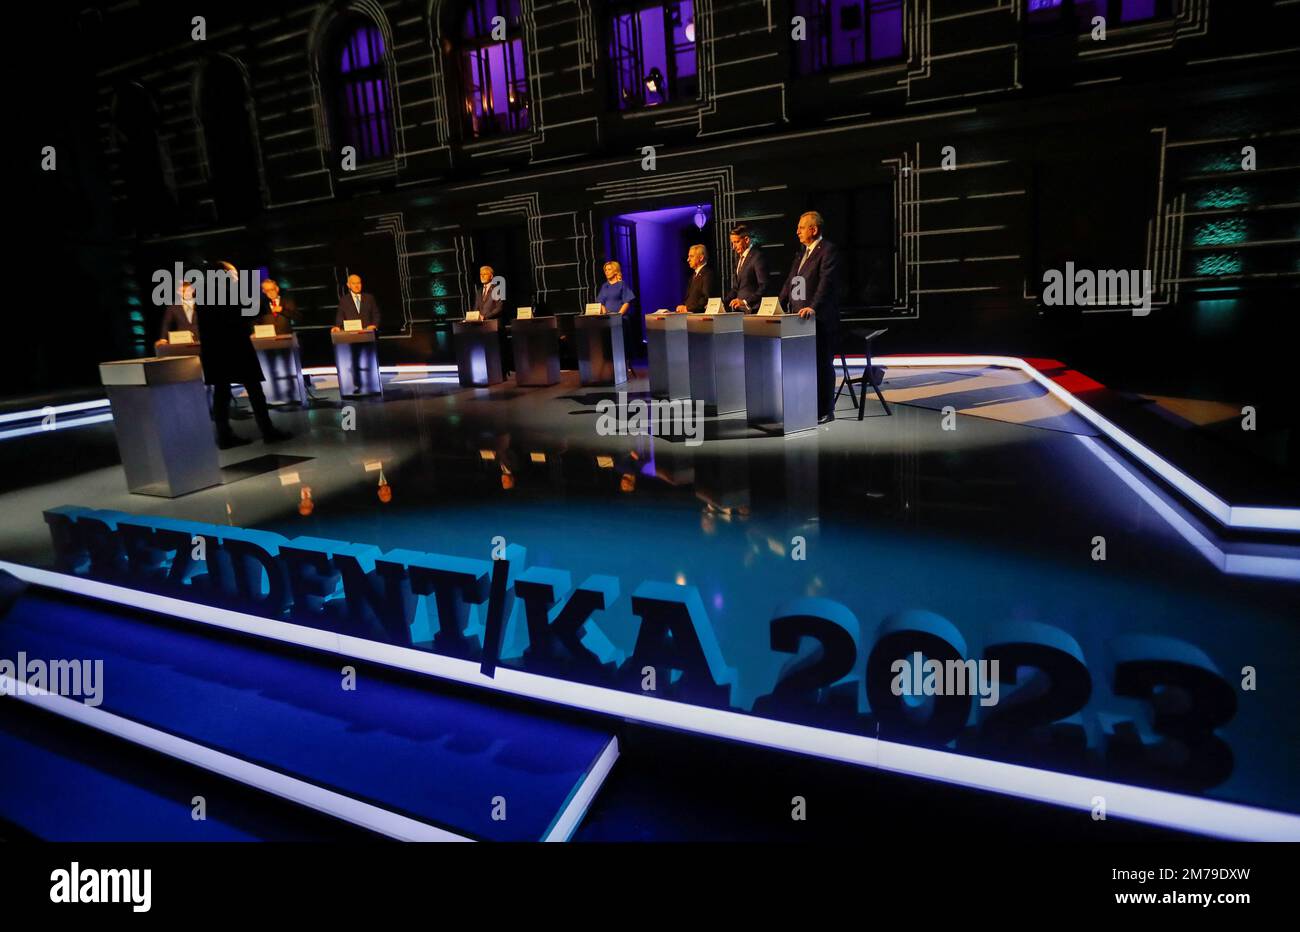 Czech Presidential Candidates Attend A Final Televised Debate Ahead Of A Direct Presidential